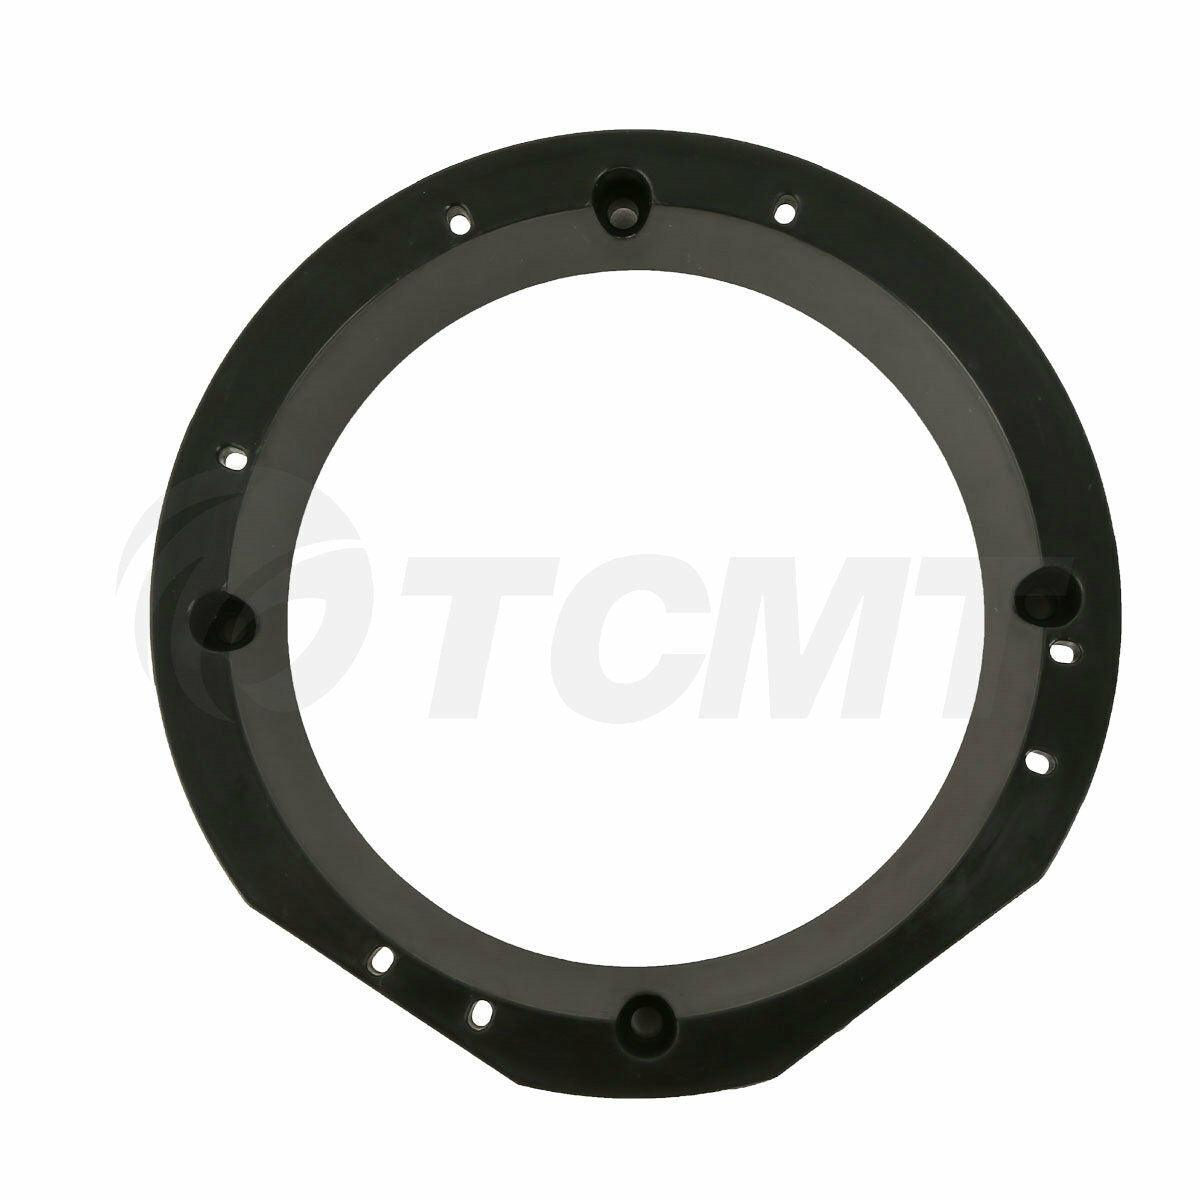 Black Speaker Adapter Rings 5.25 to 6" For Harley Touring 98-13 Batwing Fairing - Moto Life Products